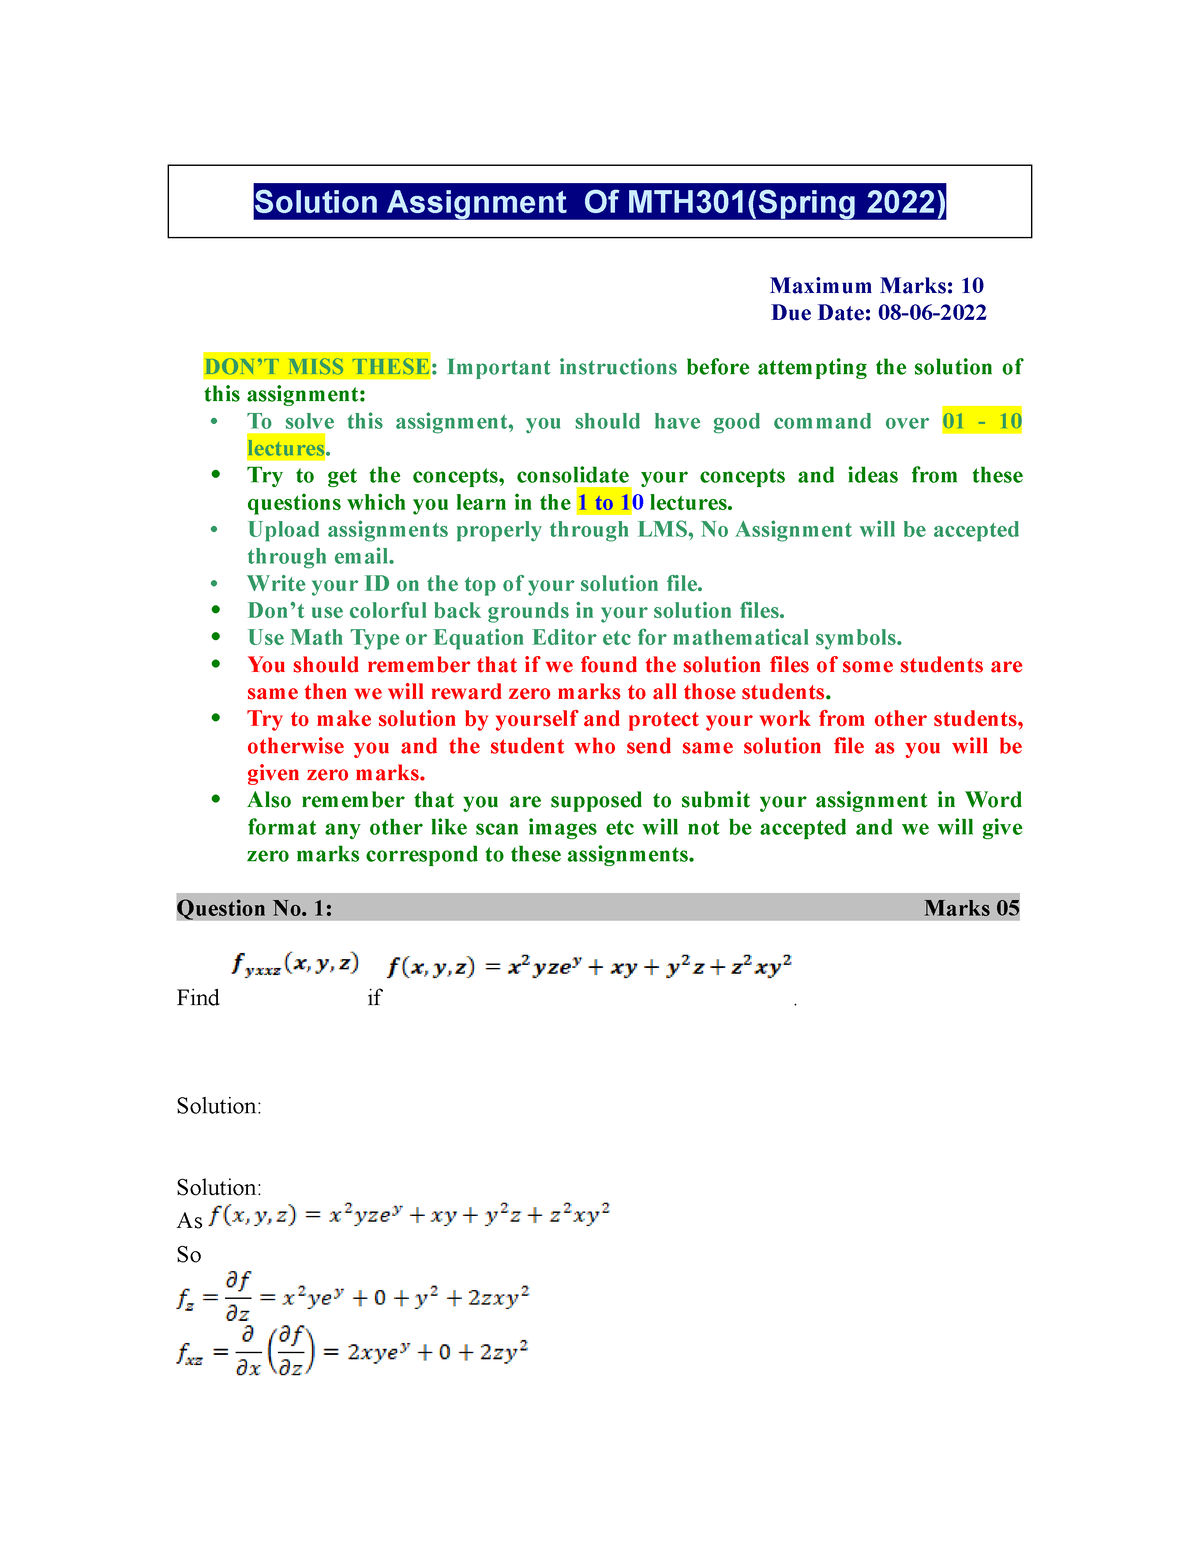 mth301 assignment 1 solution file 2022